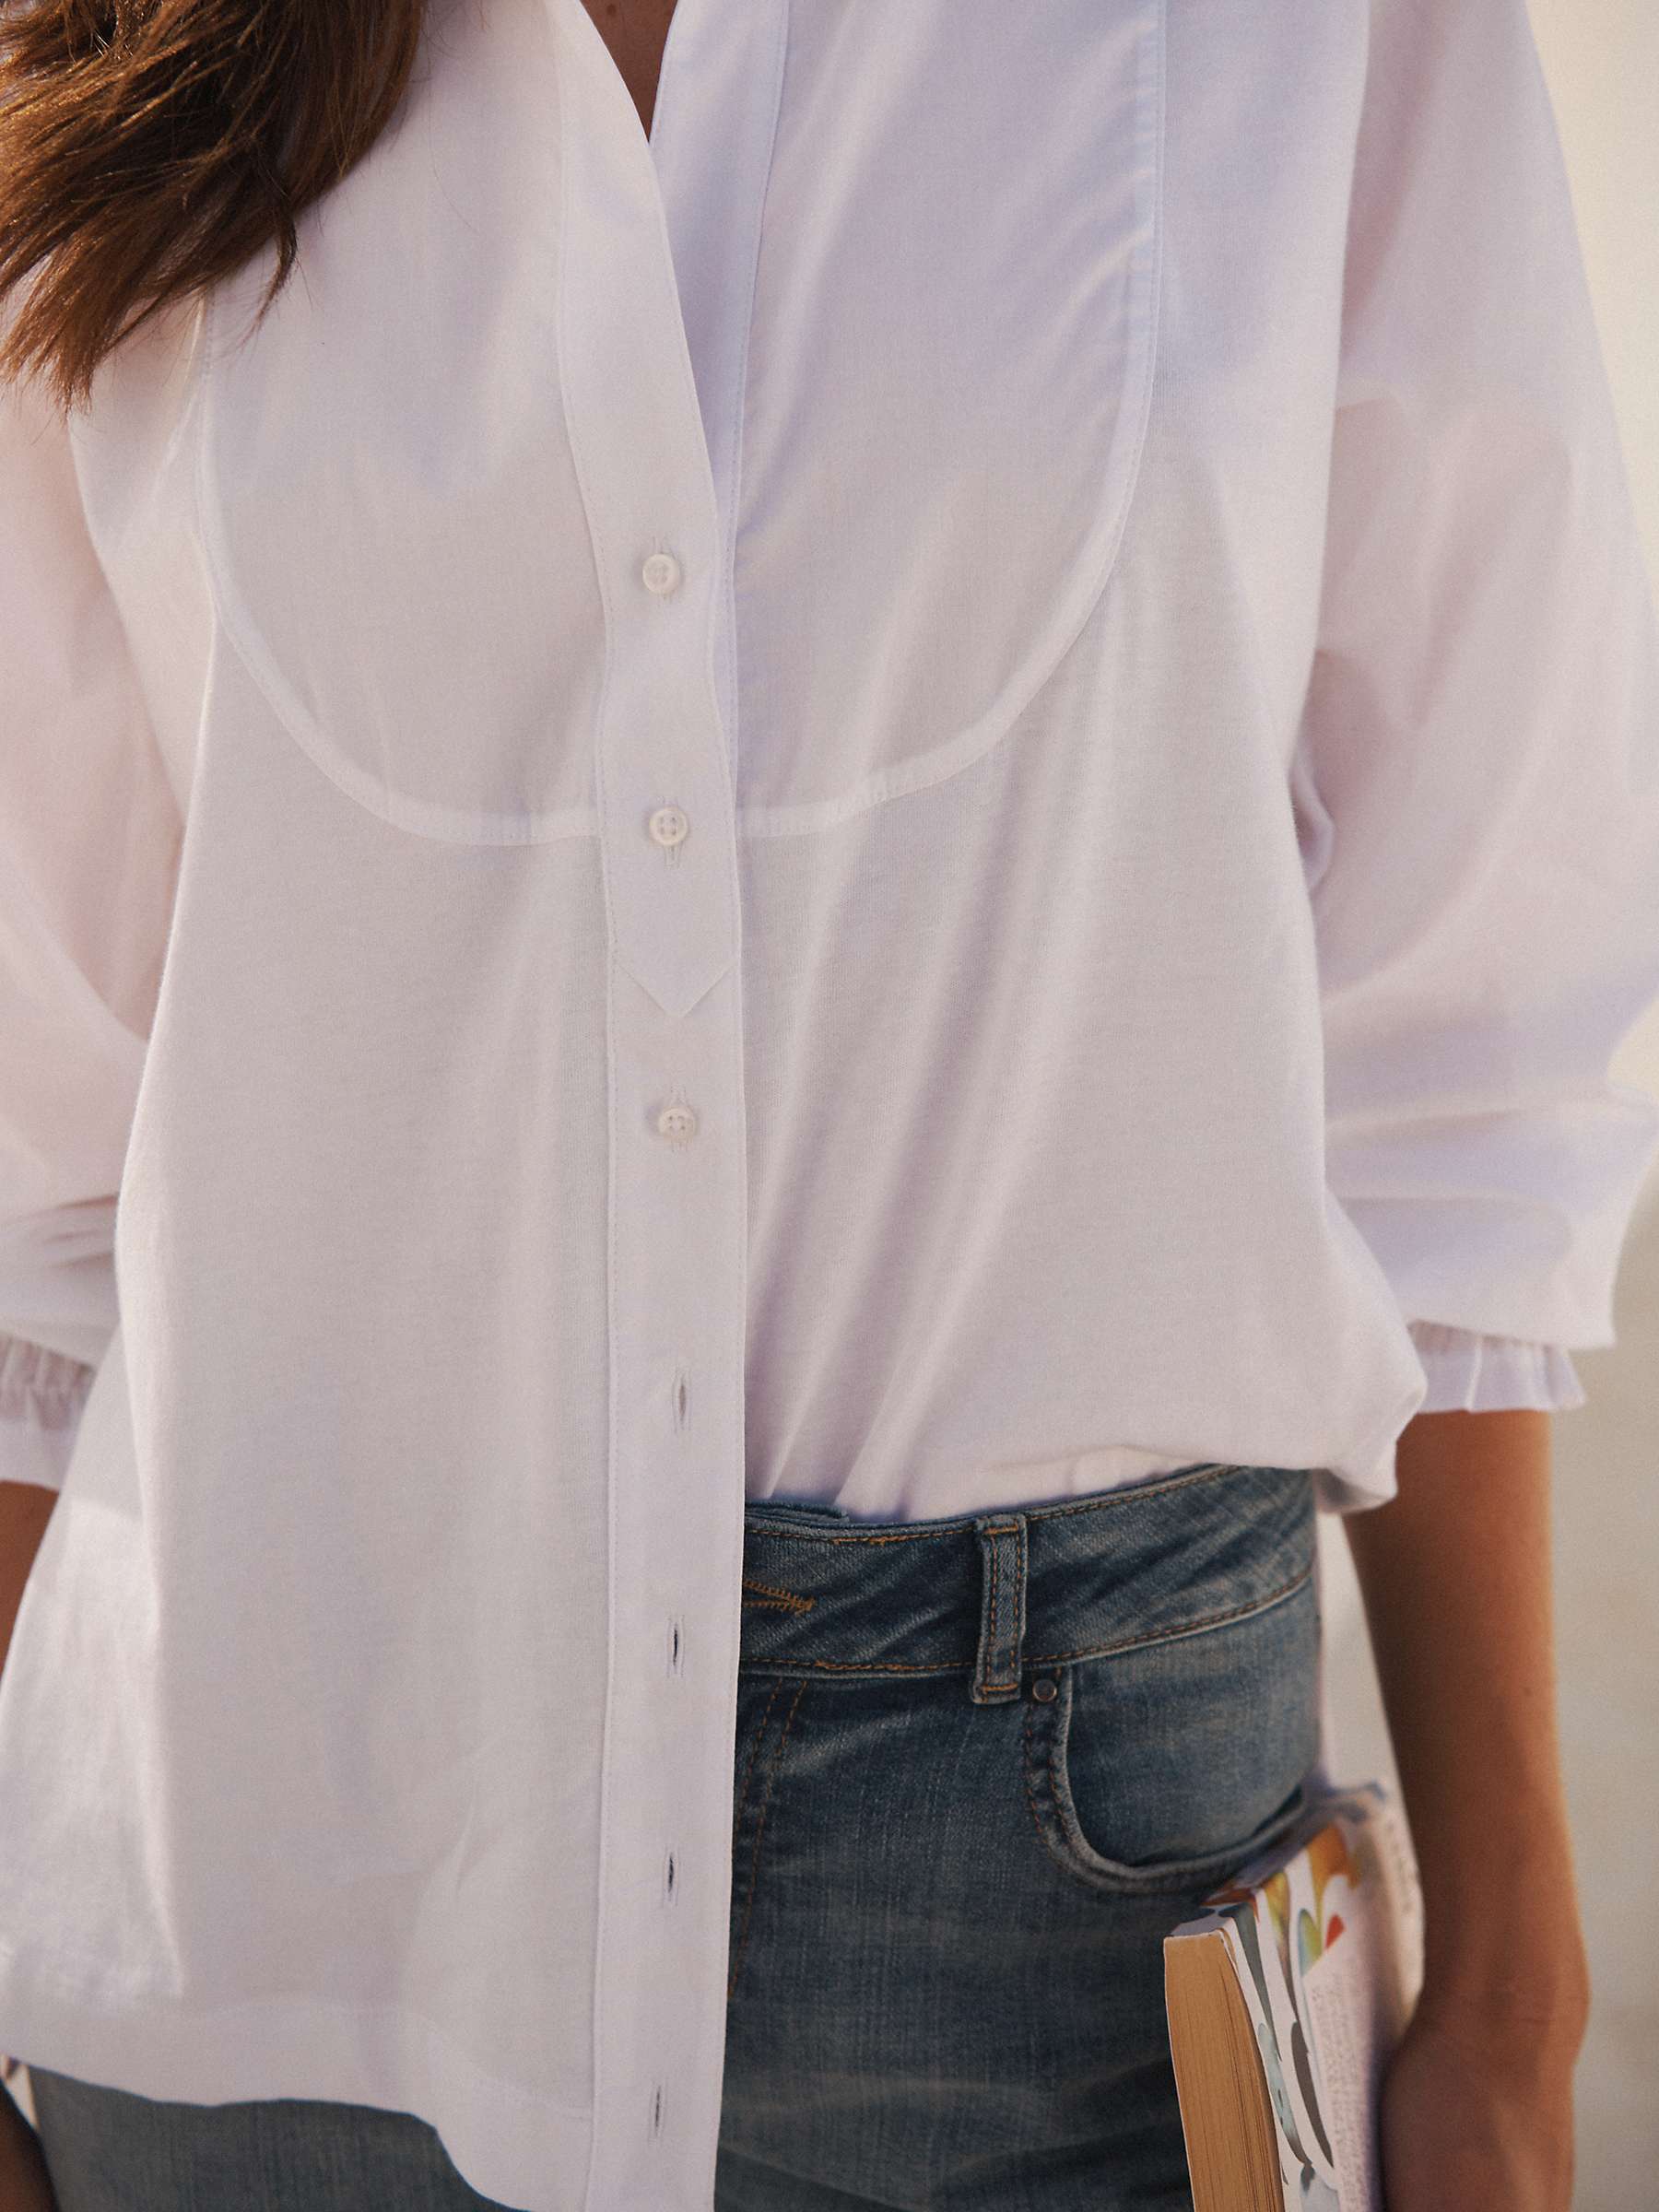 Buy NRBY Anya Cotton Shirt, White Online at johnlewis.com